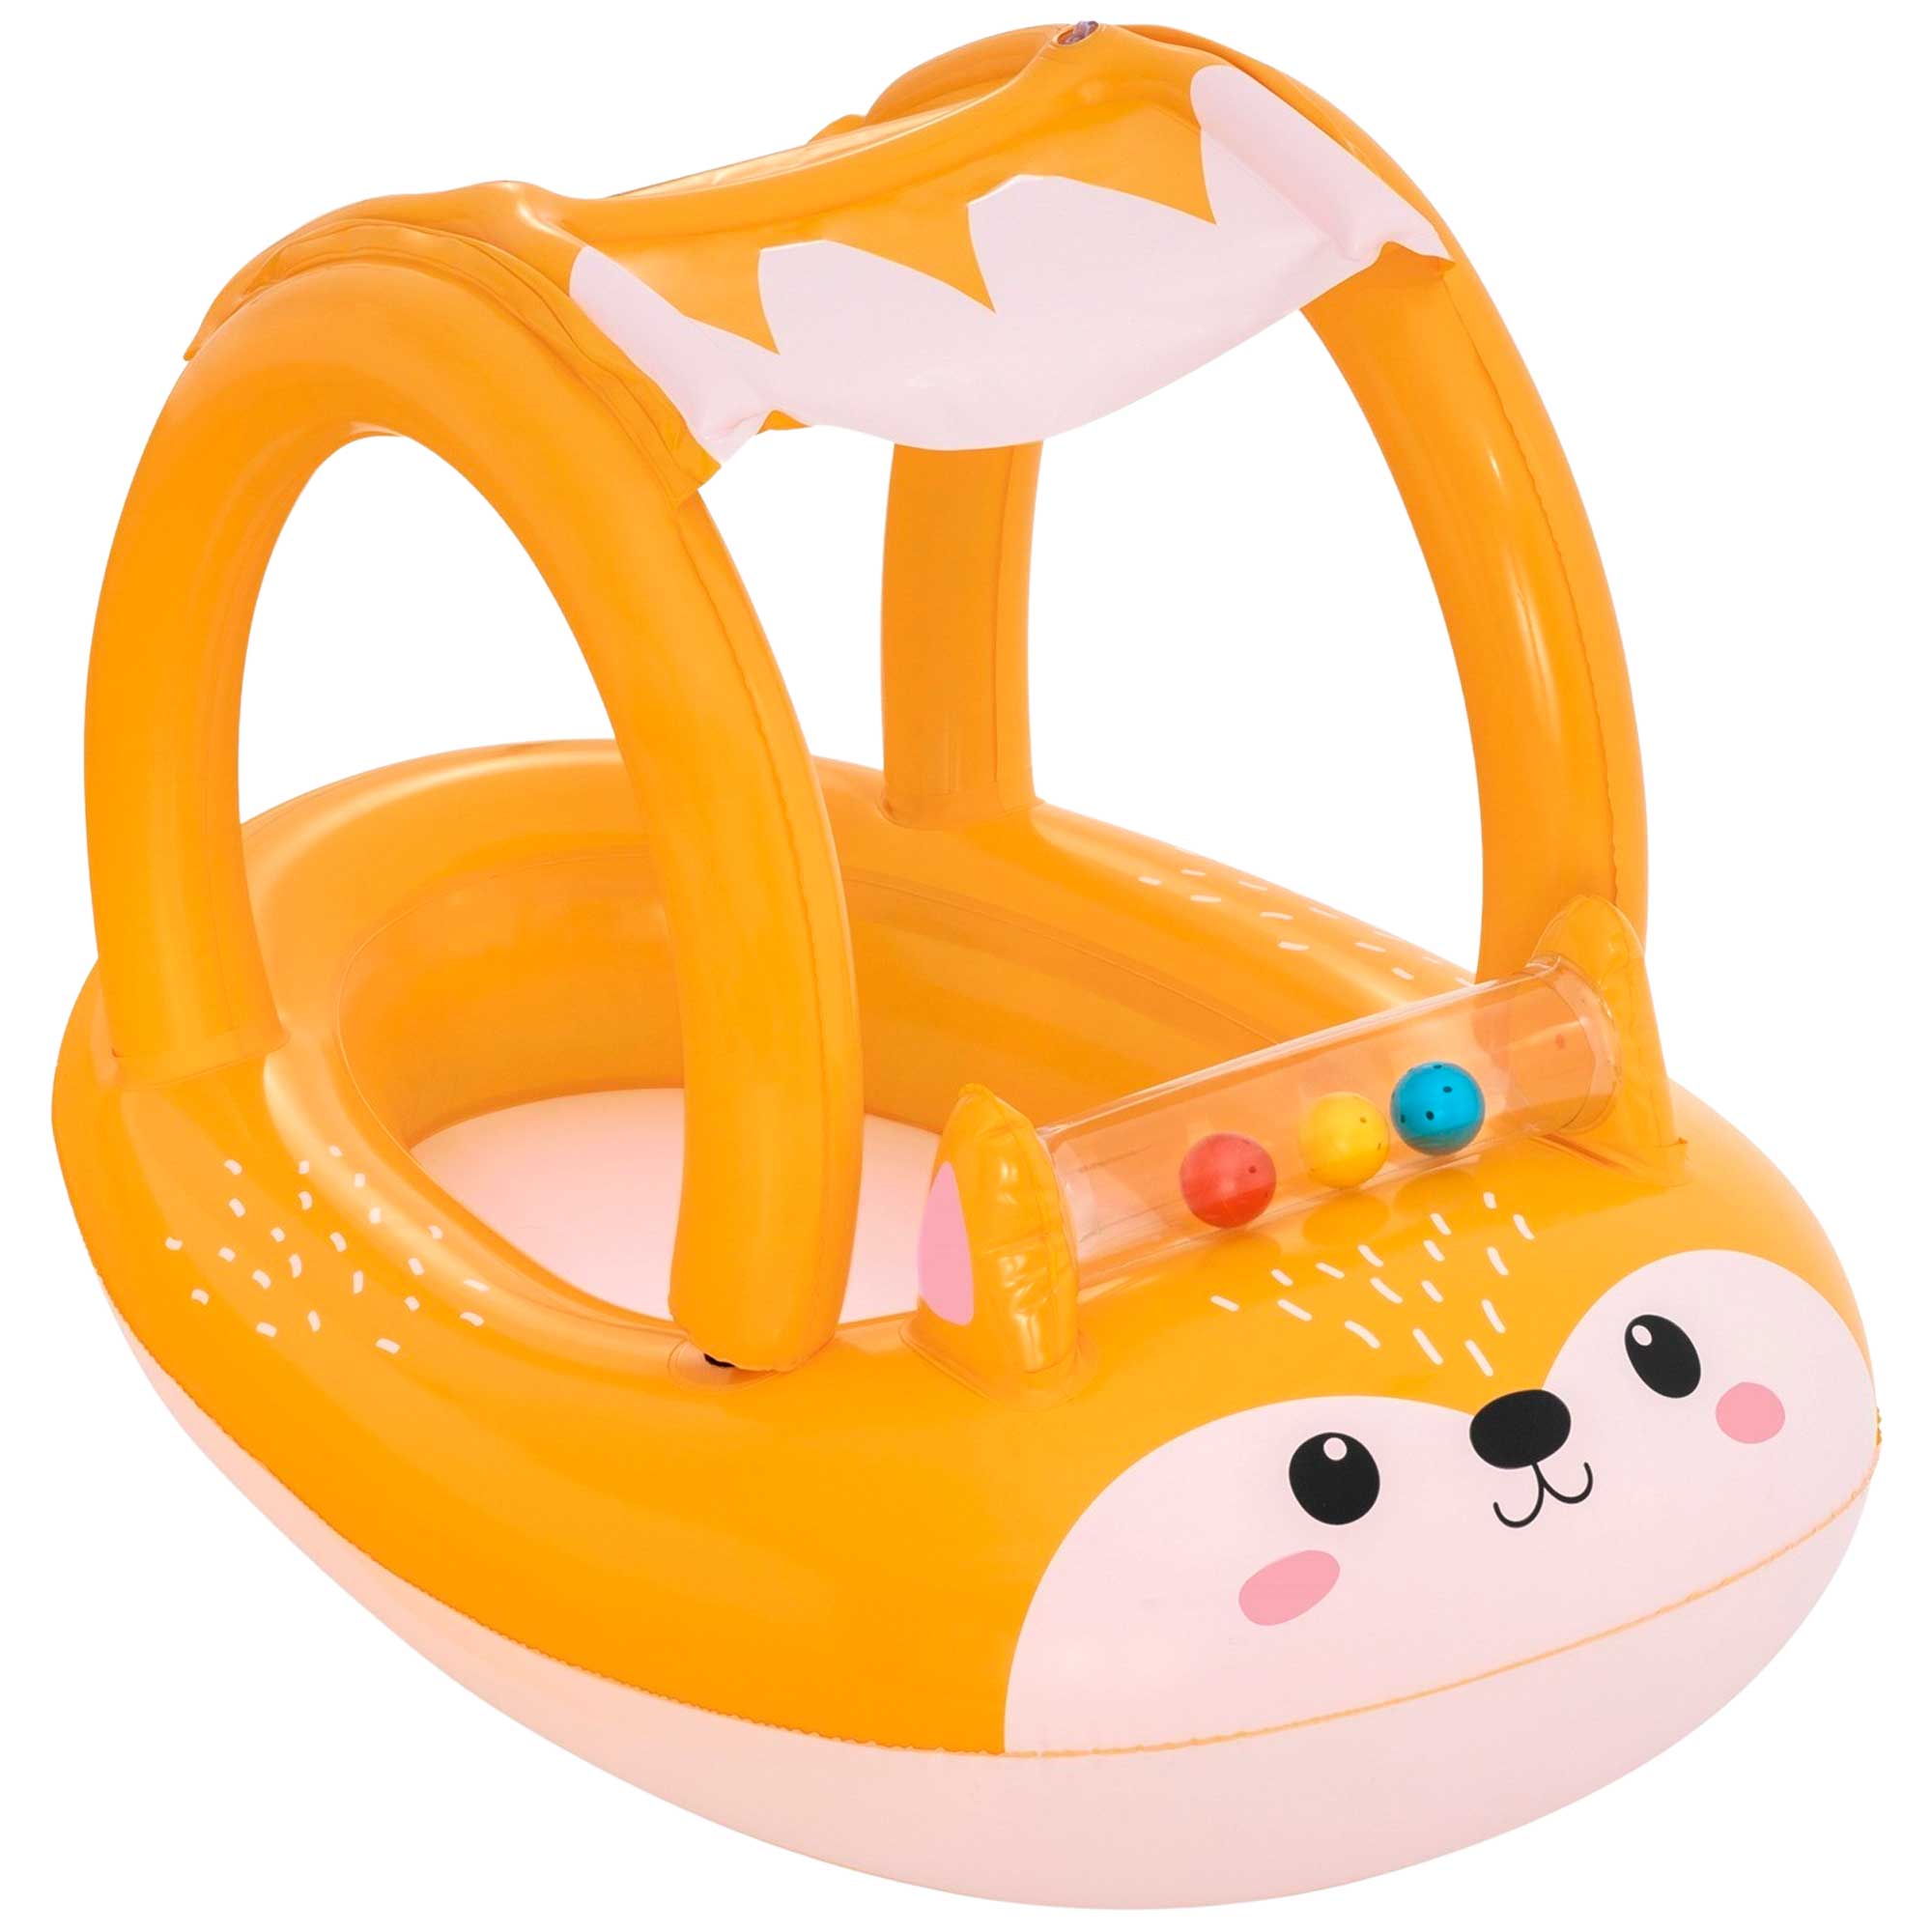 Bote Inflable BESTWAY con Techo